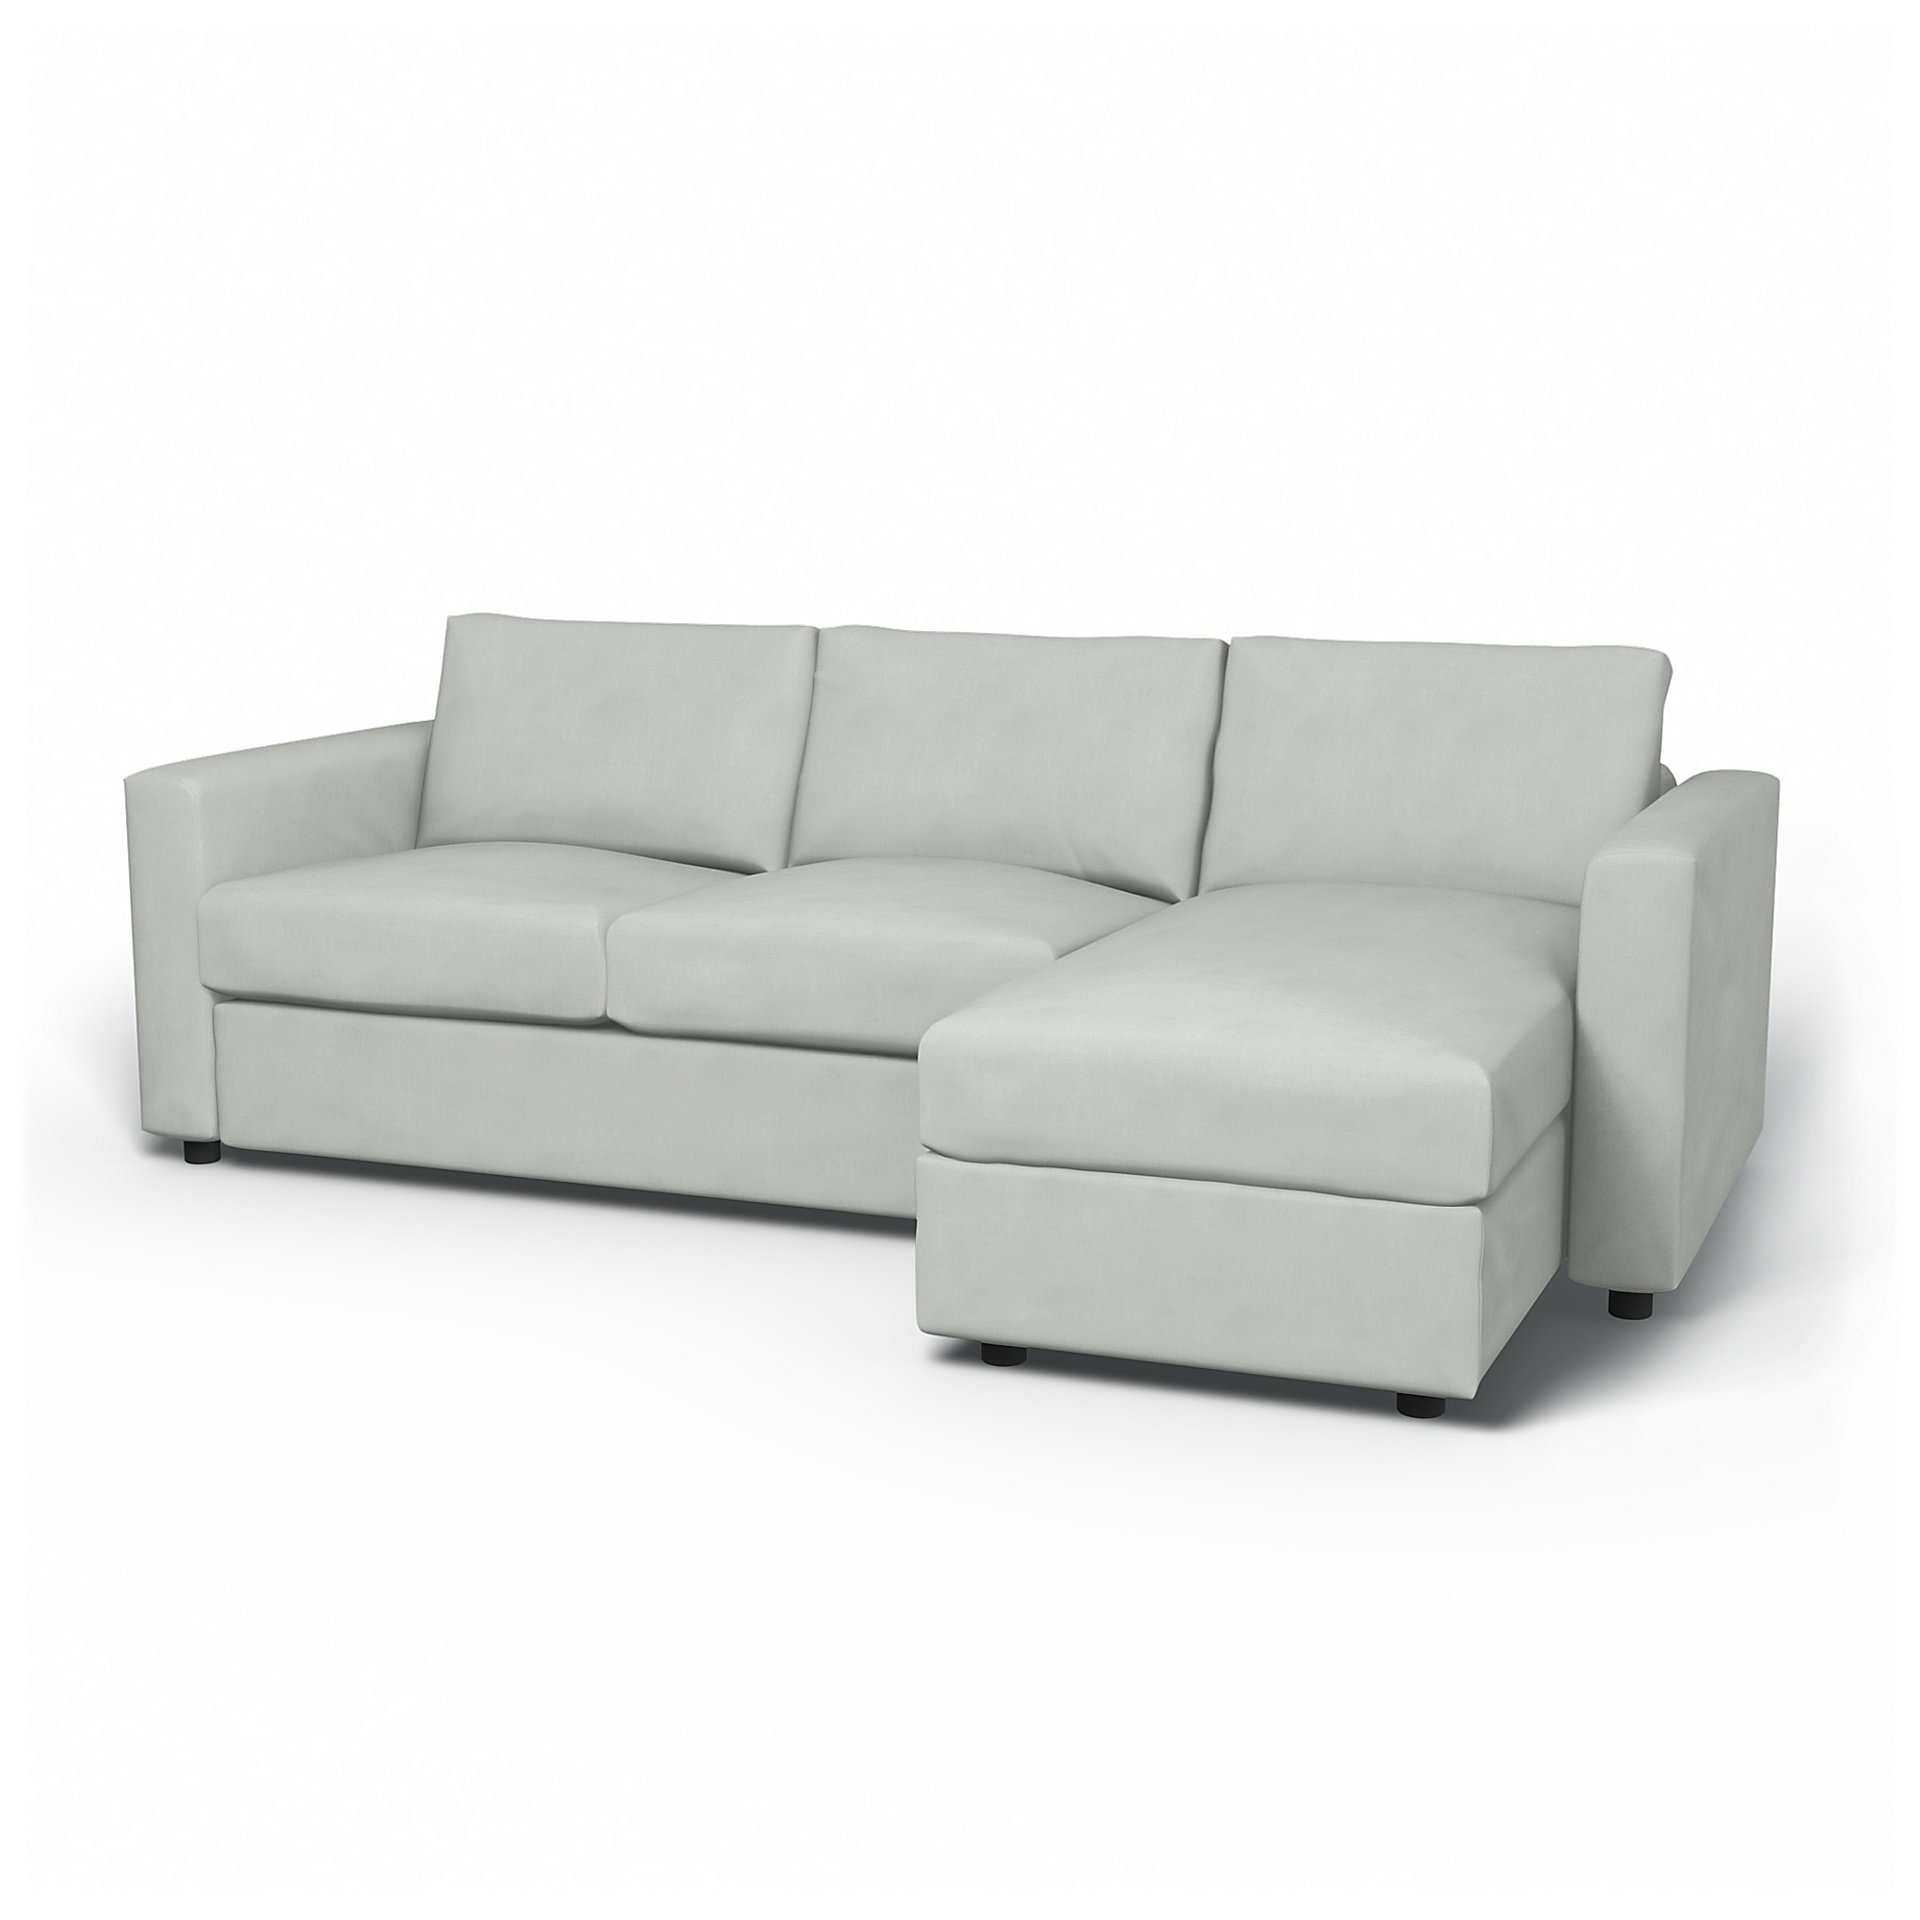 IKEA - Vimle 2 Seater Sofa with Chaise Cover, Silver Grey, Linen - Bemz